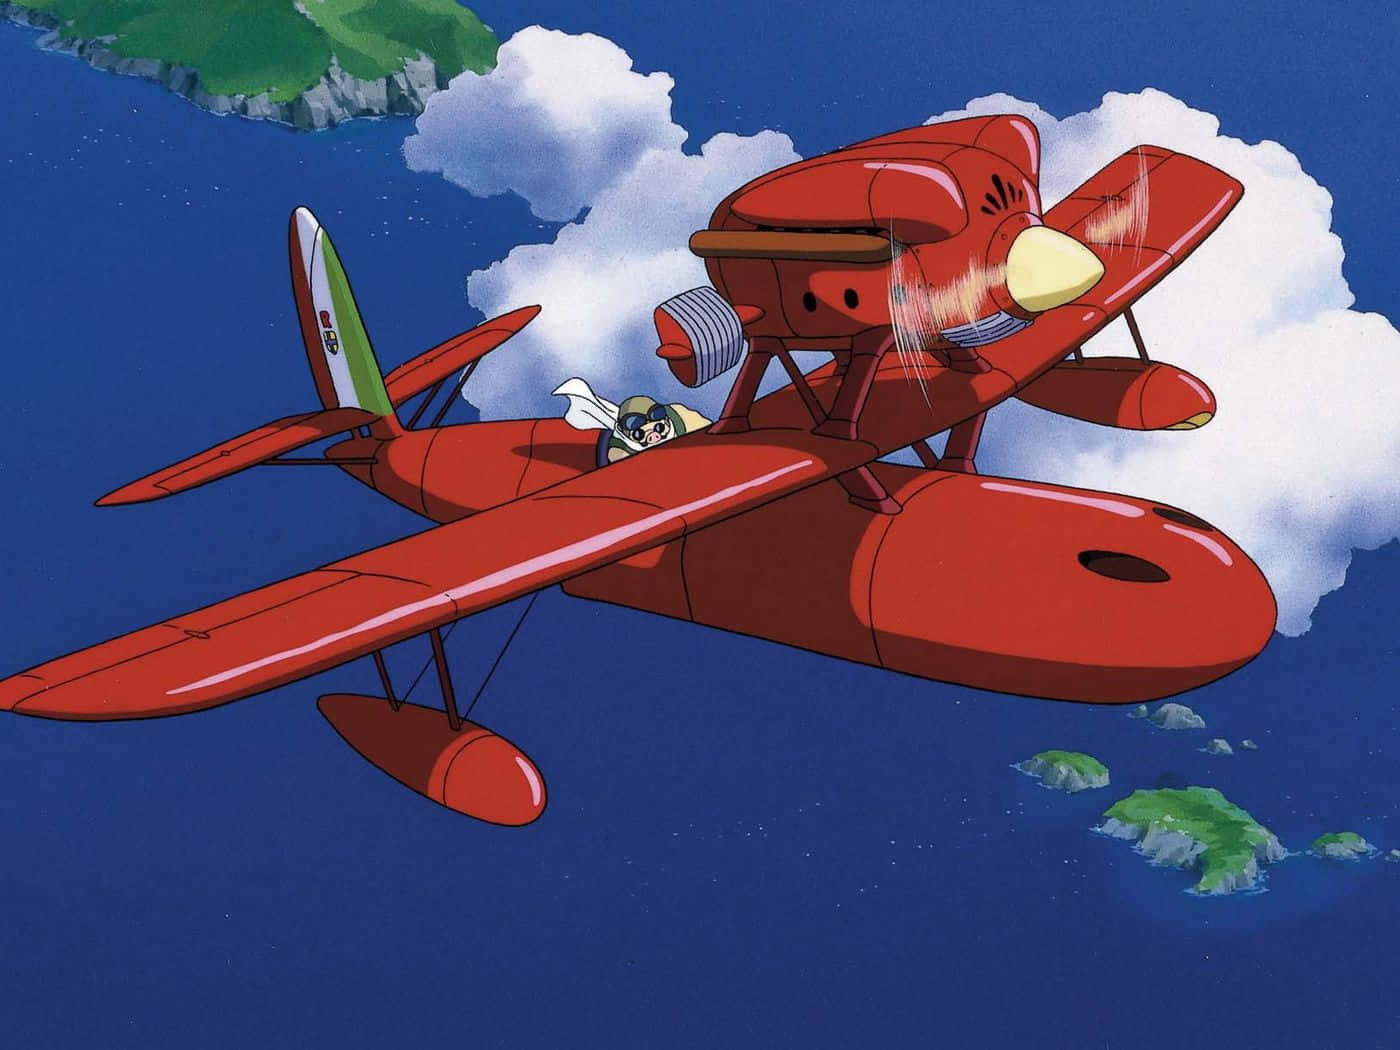 Download Porco Rosso Flying over the Adriatic Sea Wallpaper ...